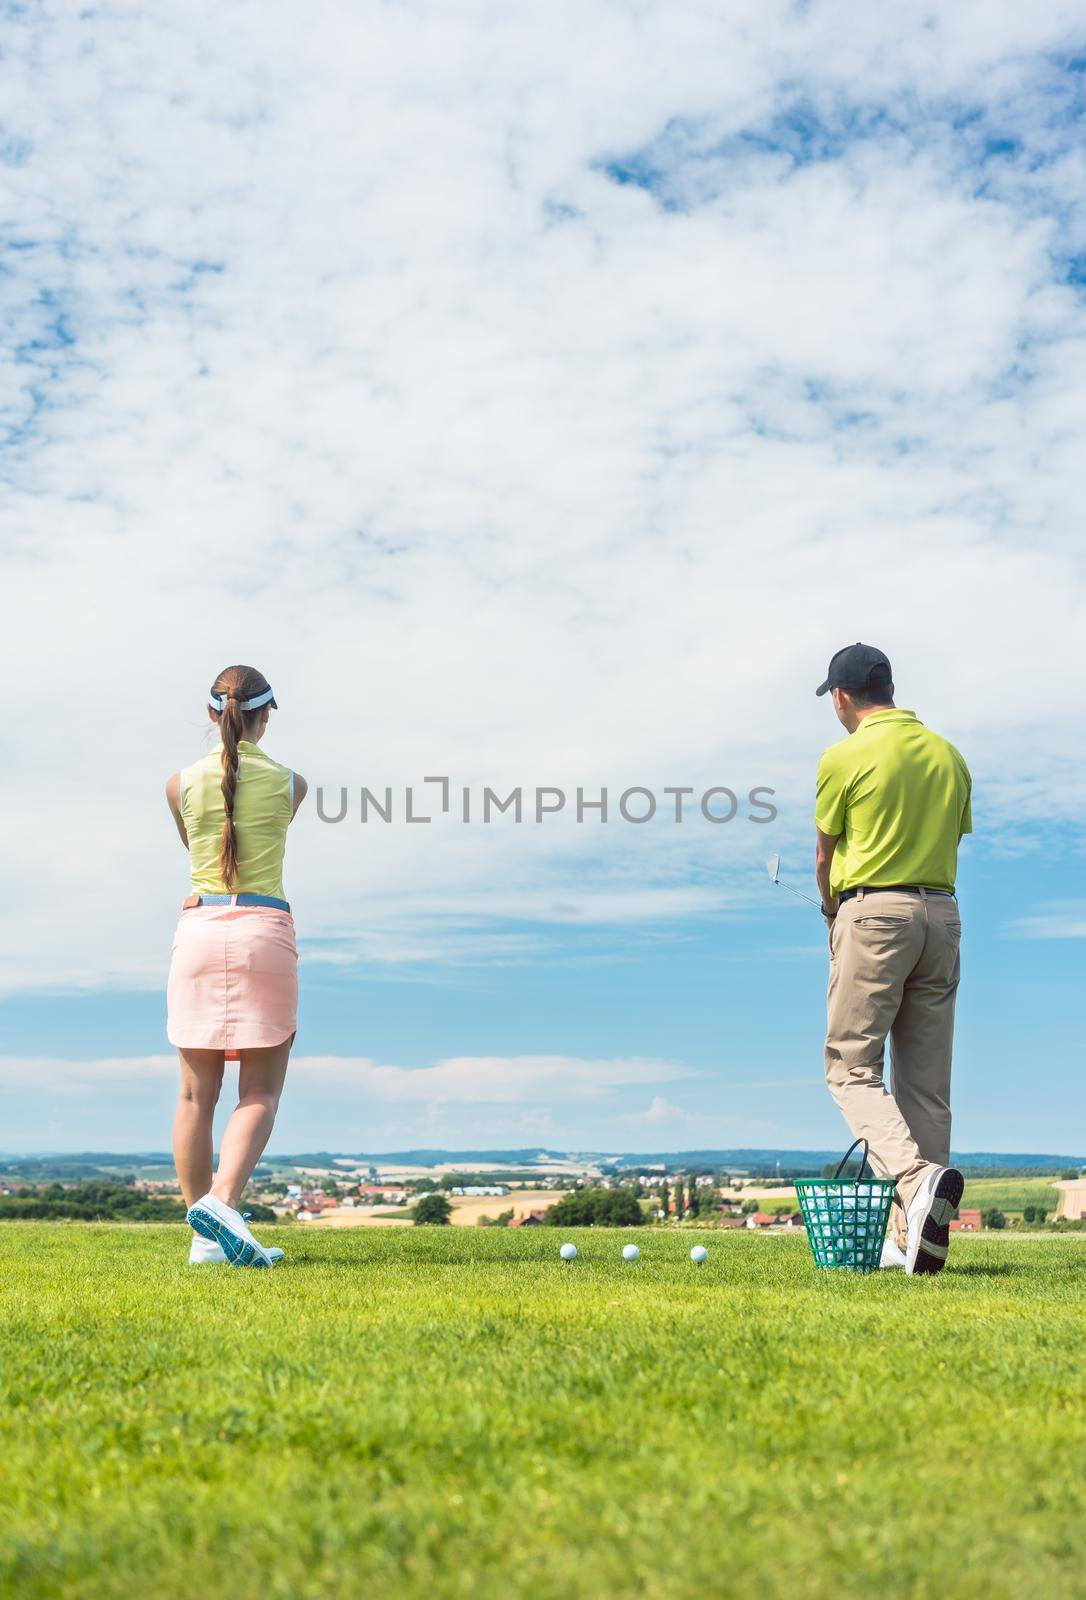 Full length of a young woman smiling while practicing the correct move for striking during golf class with a skilled professional player outdoors